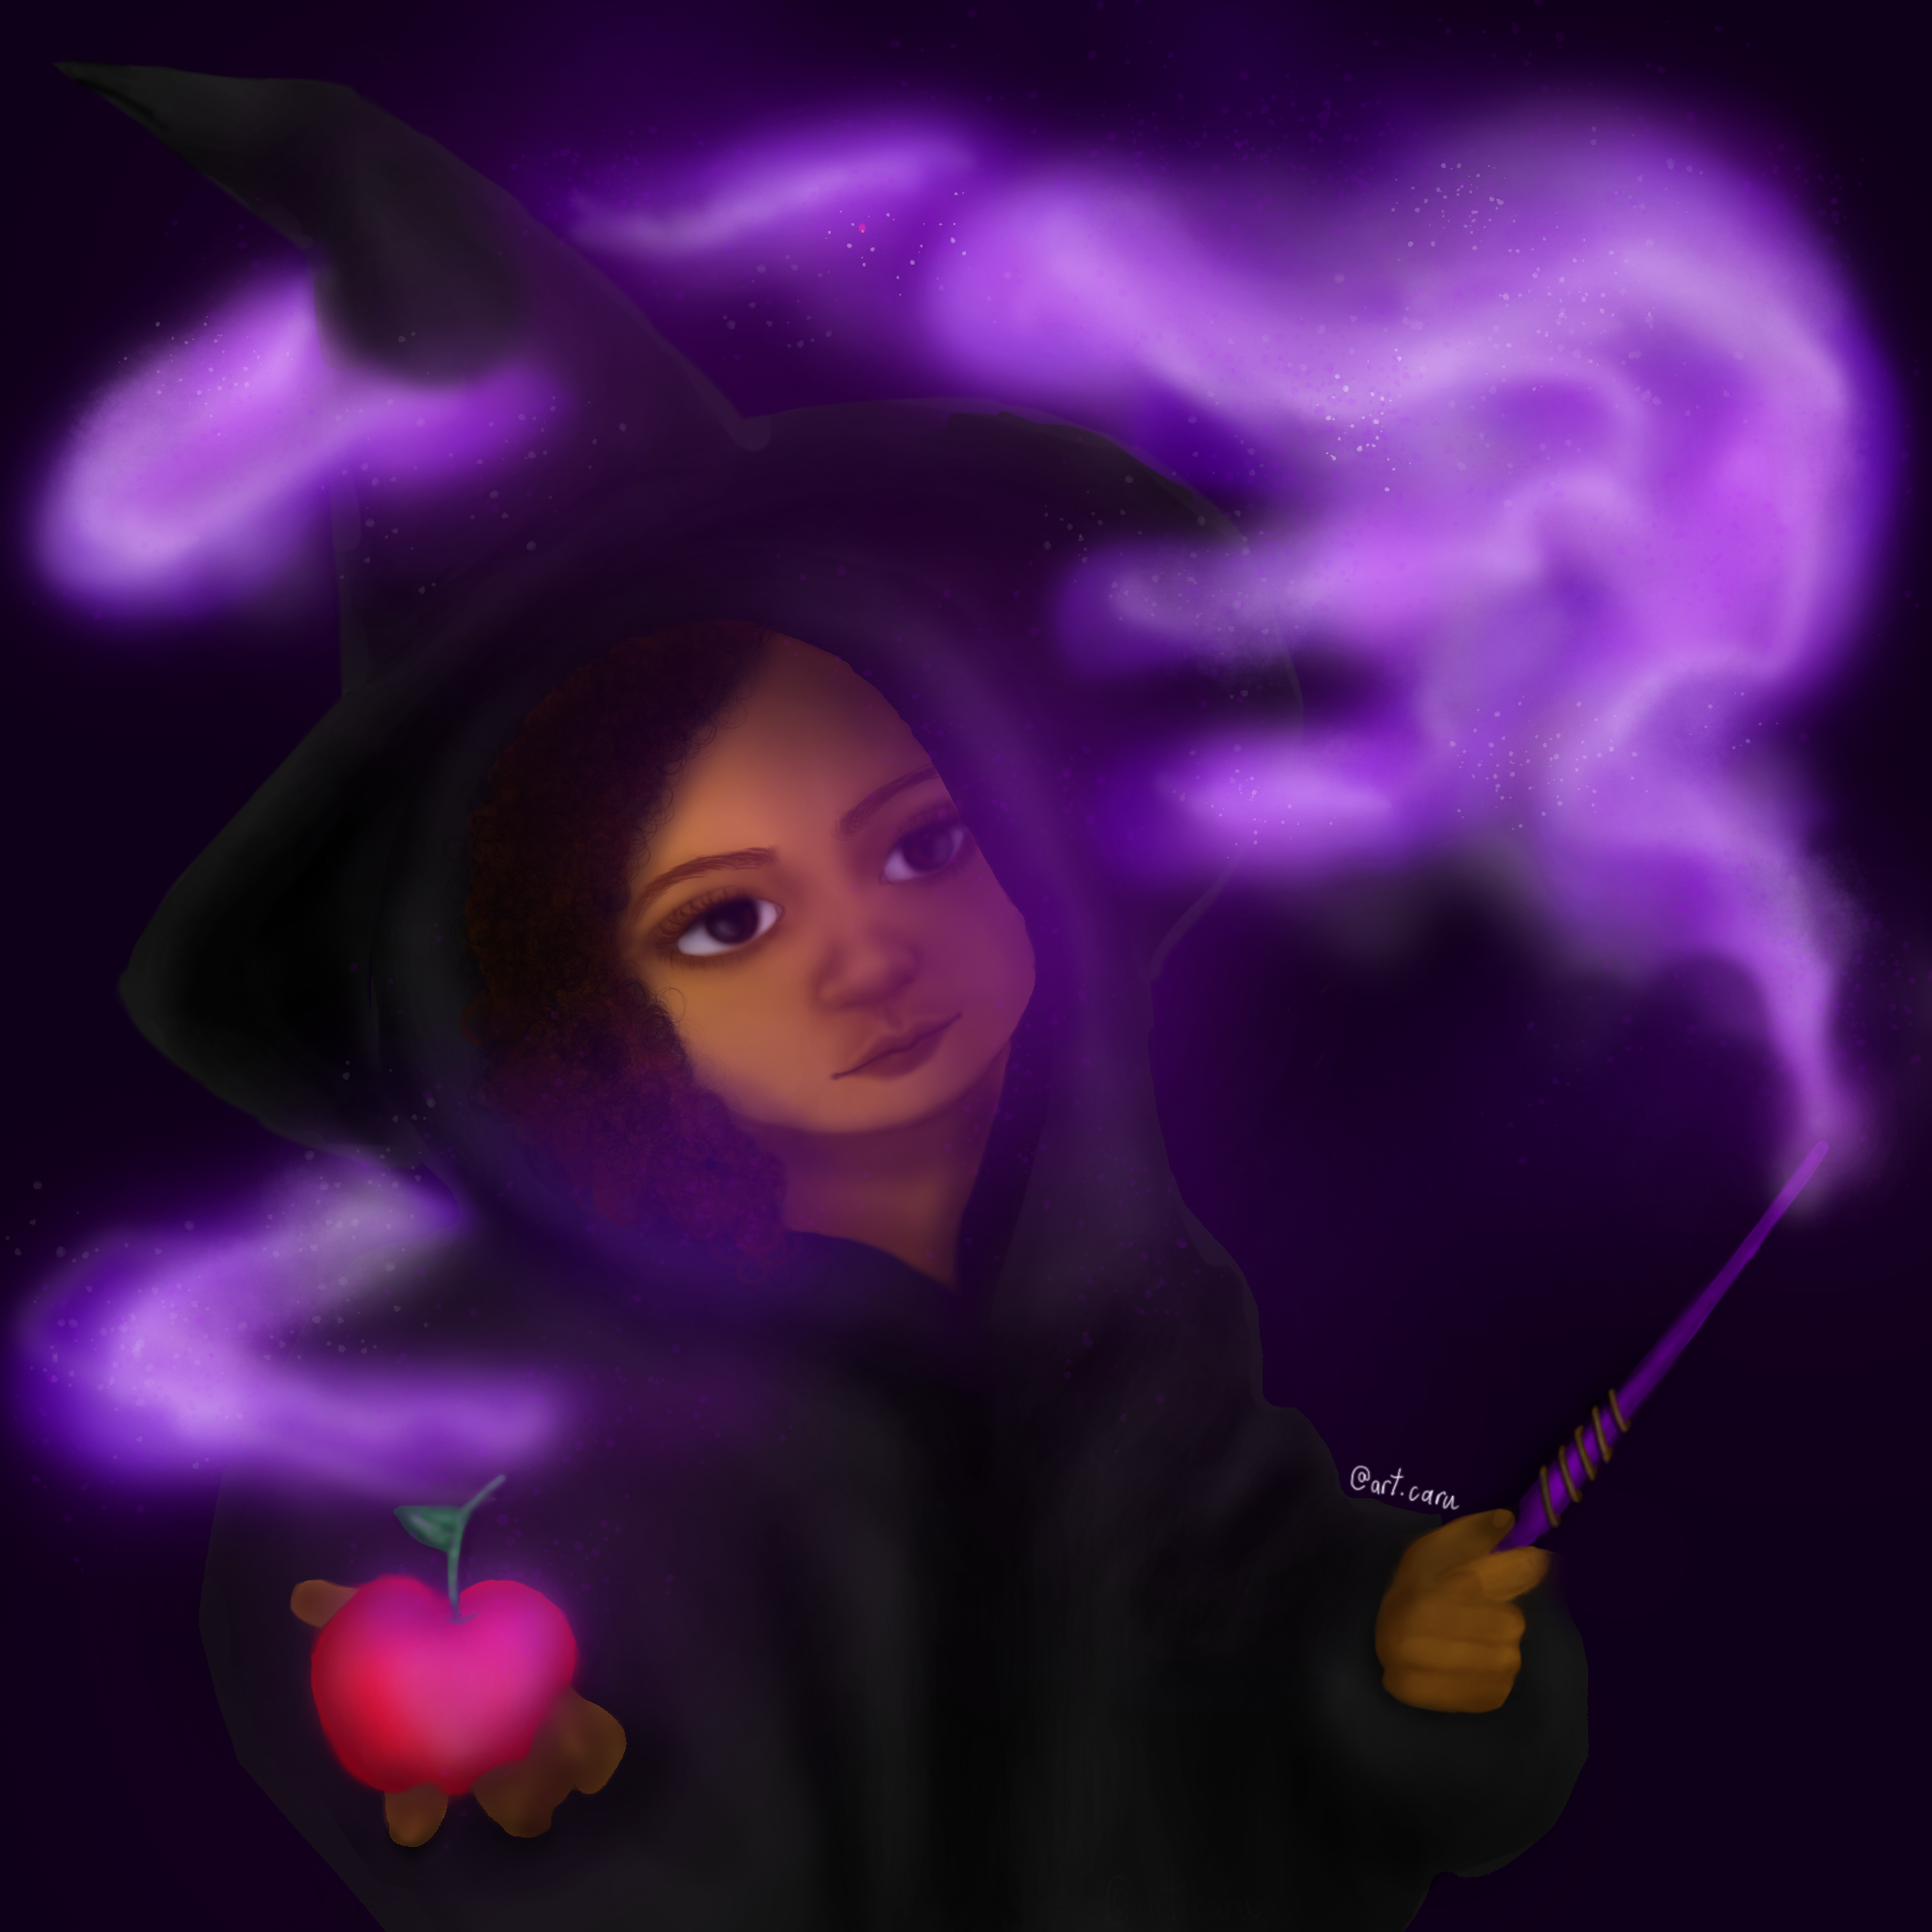 Little Witch by art.caru